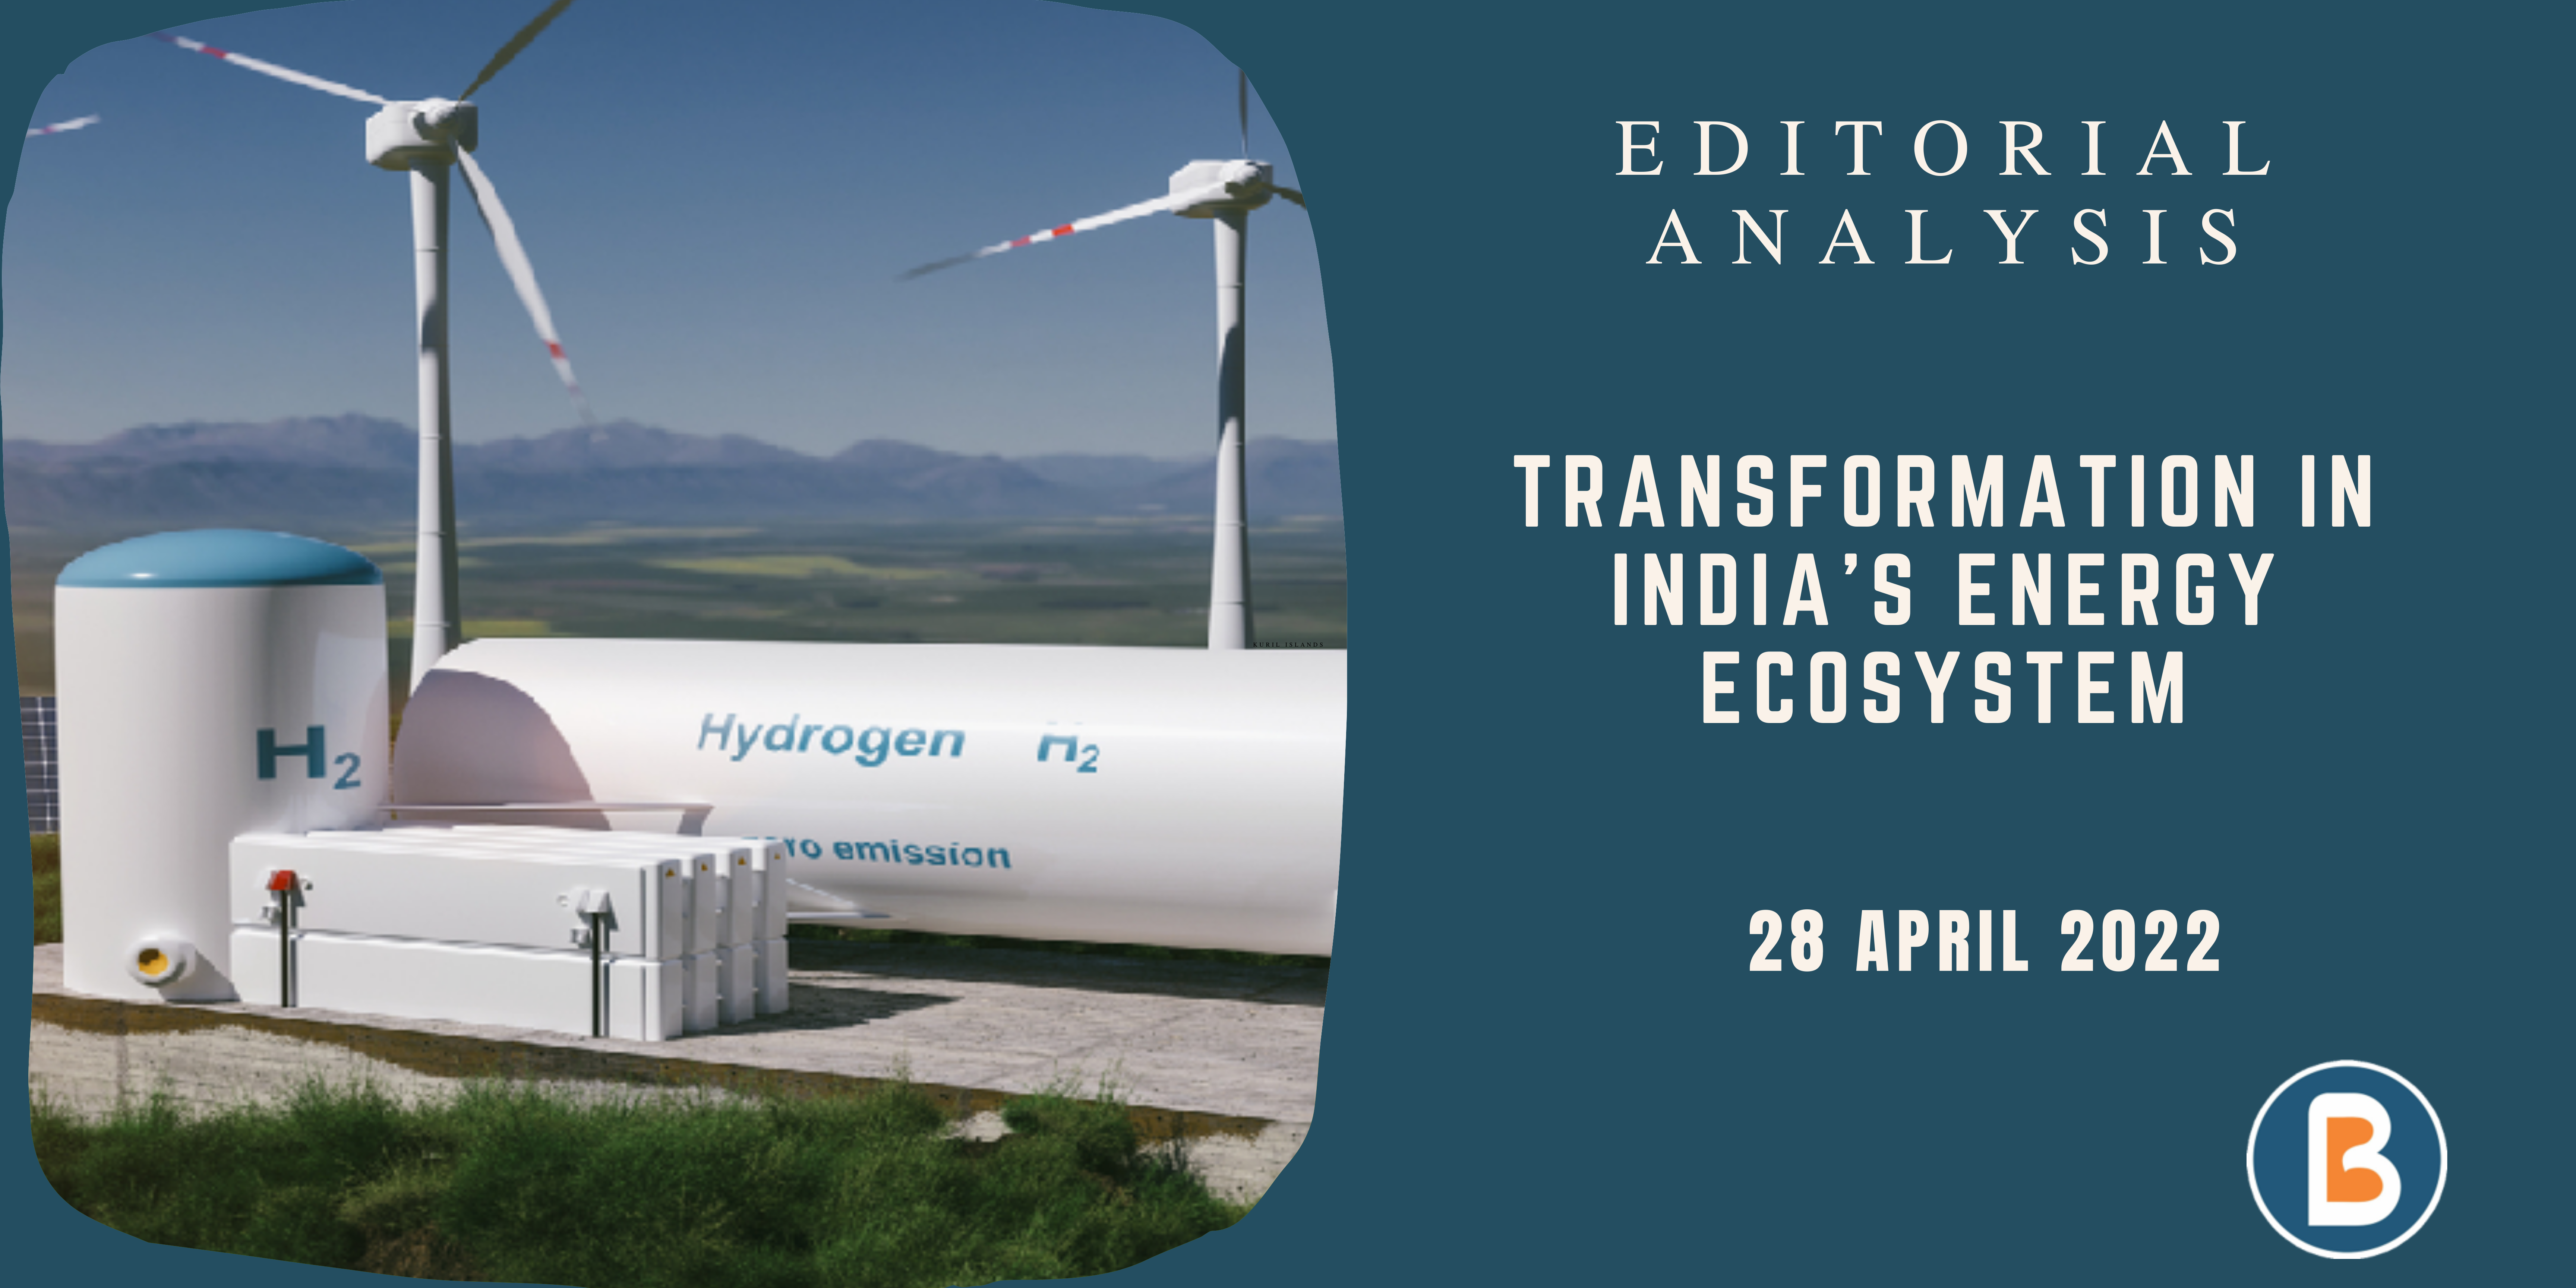 Editorial Analysis for IAS - Transformation in India’s Energy Ecosystem